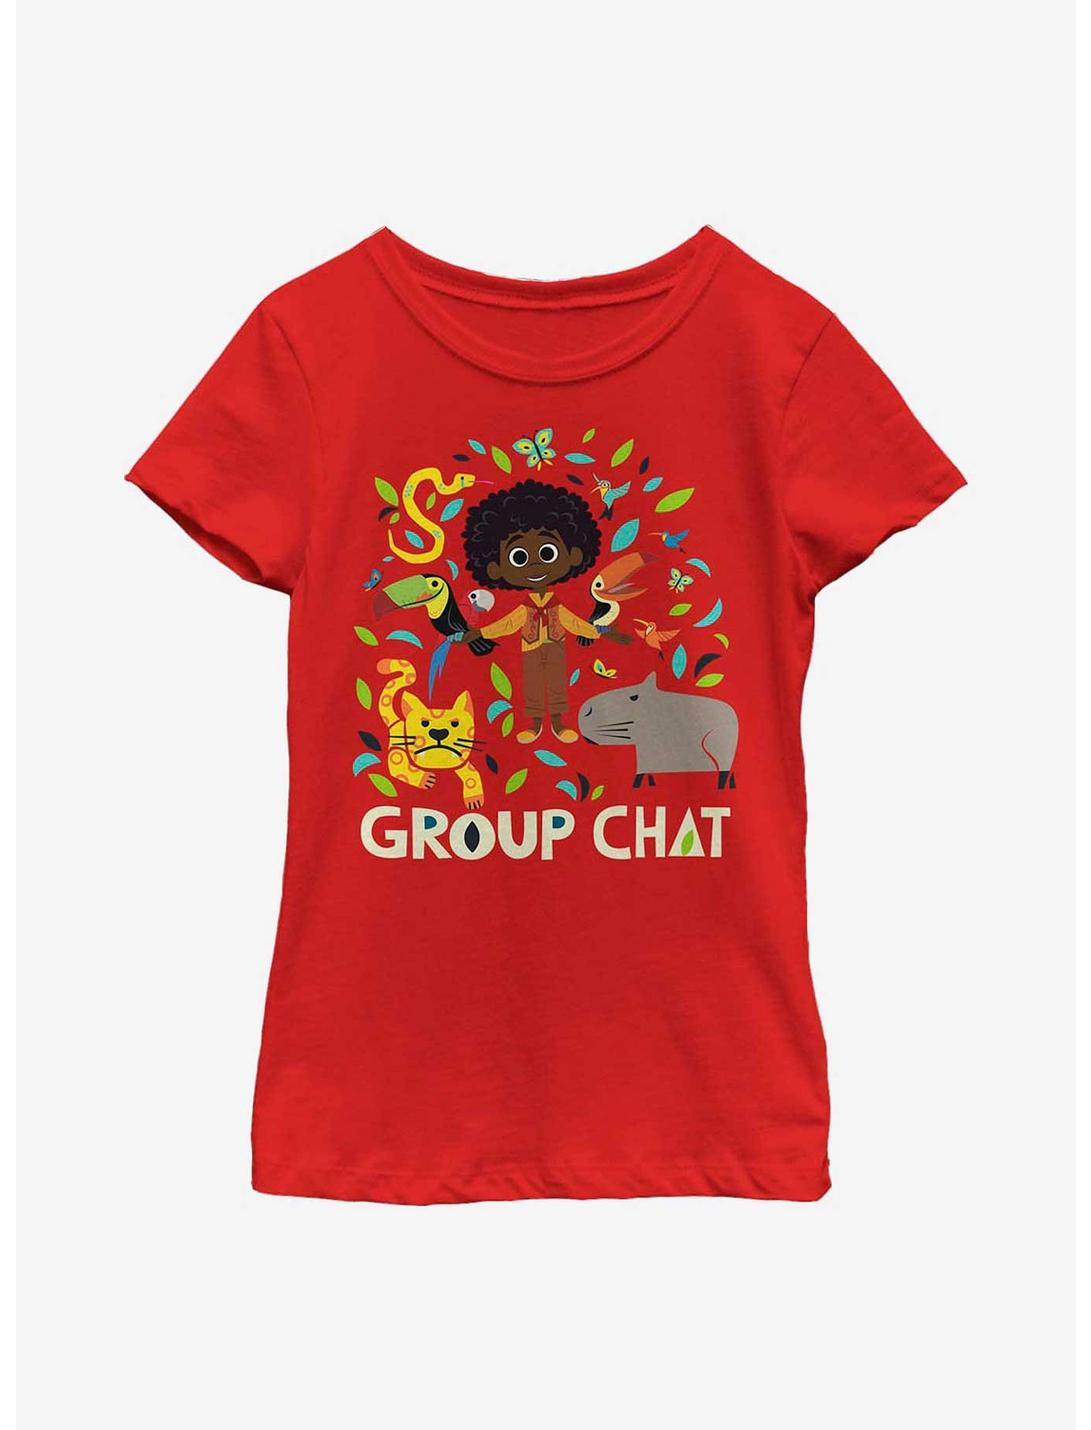 Plus Size Disney Encanto Group Chat Youth Girls T-Shirt, RED, hi-res